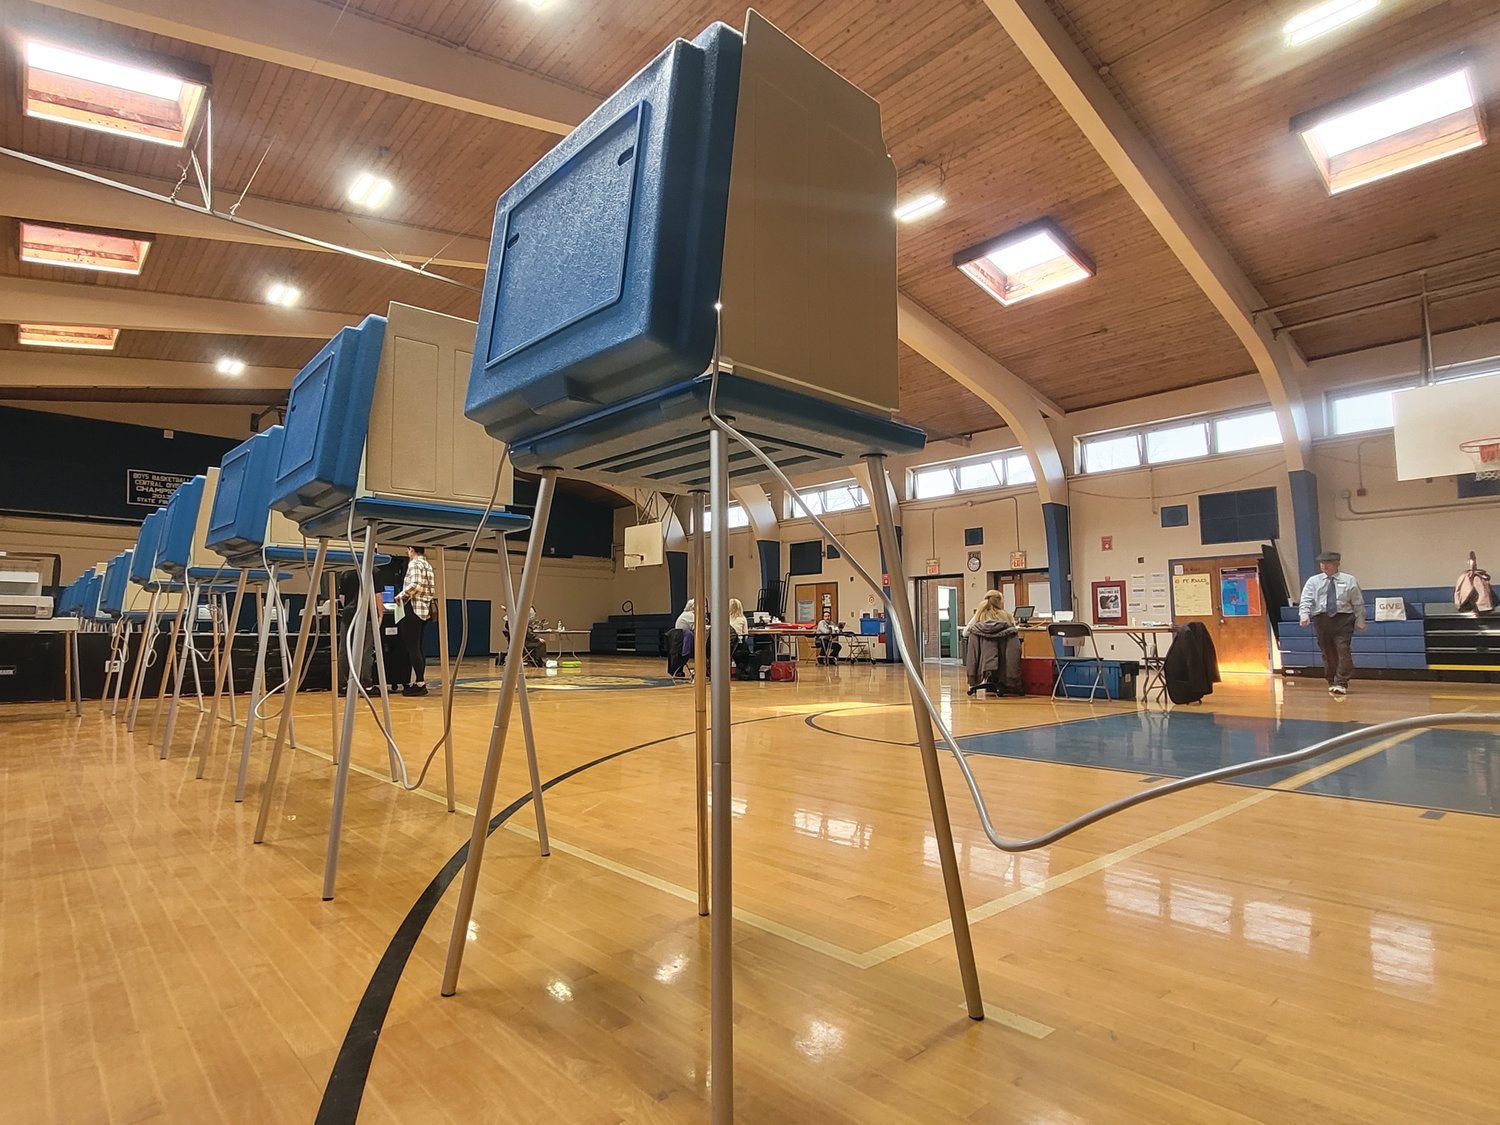 LIGHT TURNOUT: Only 5.33 percent, or 1,278 of the town’s 23,980 registered voters, marked ballots on Tuesday. Early and mail-in voting turnout was also very low, according to town officials.